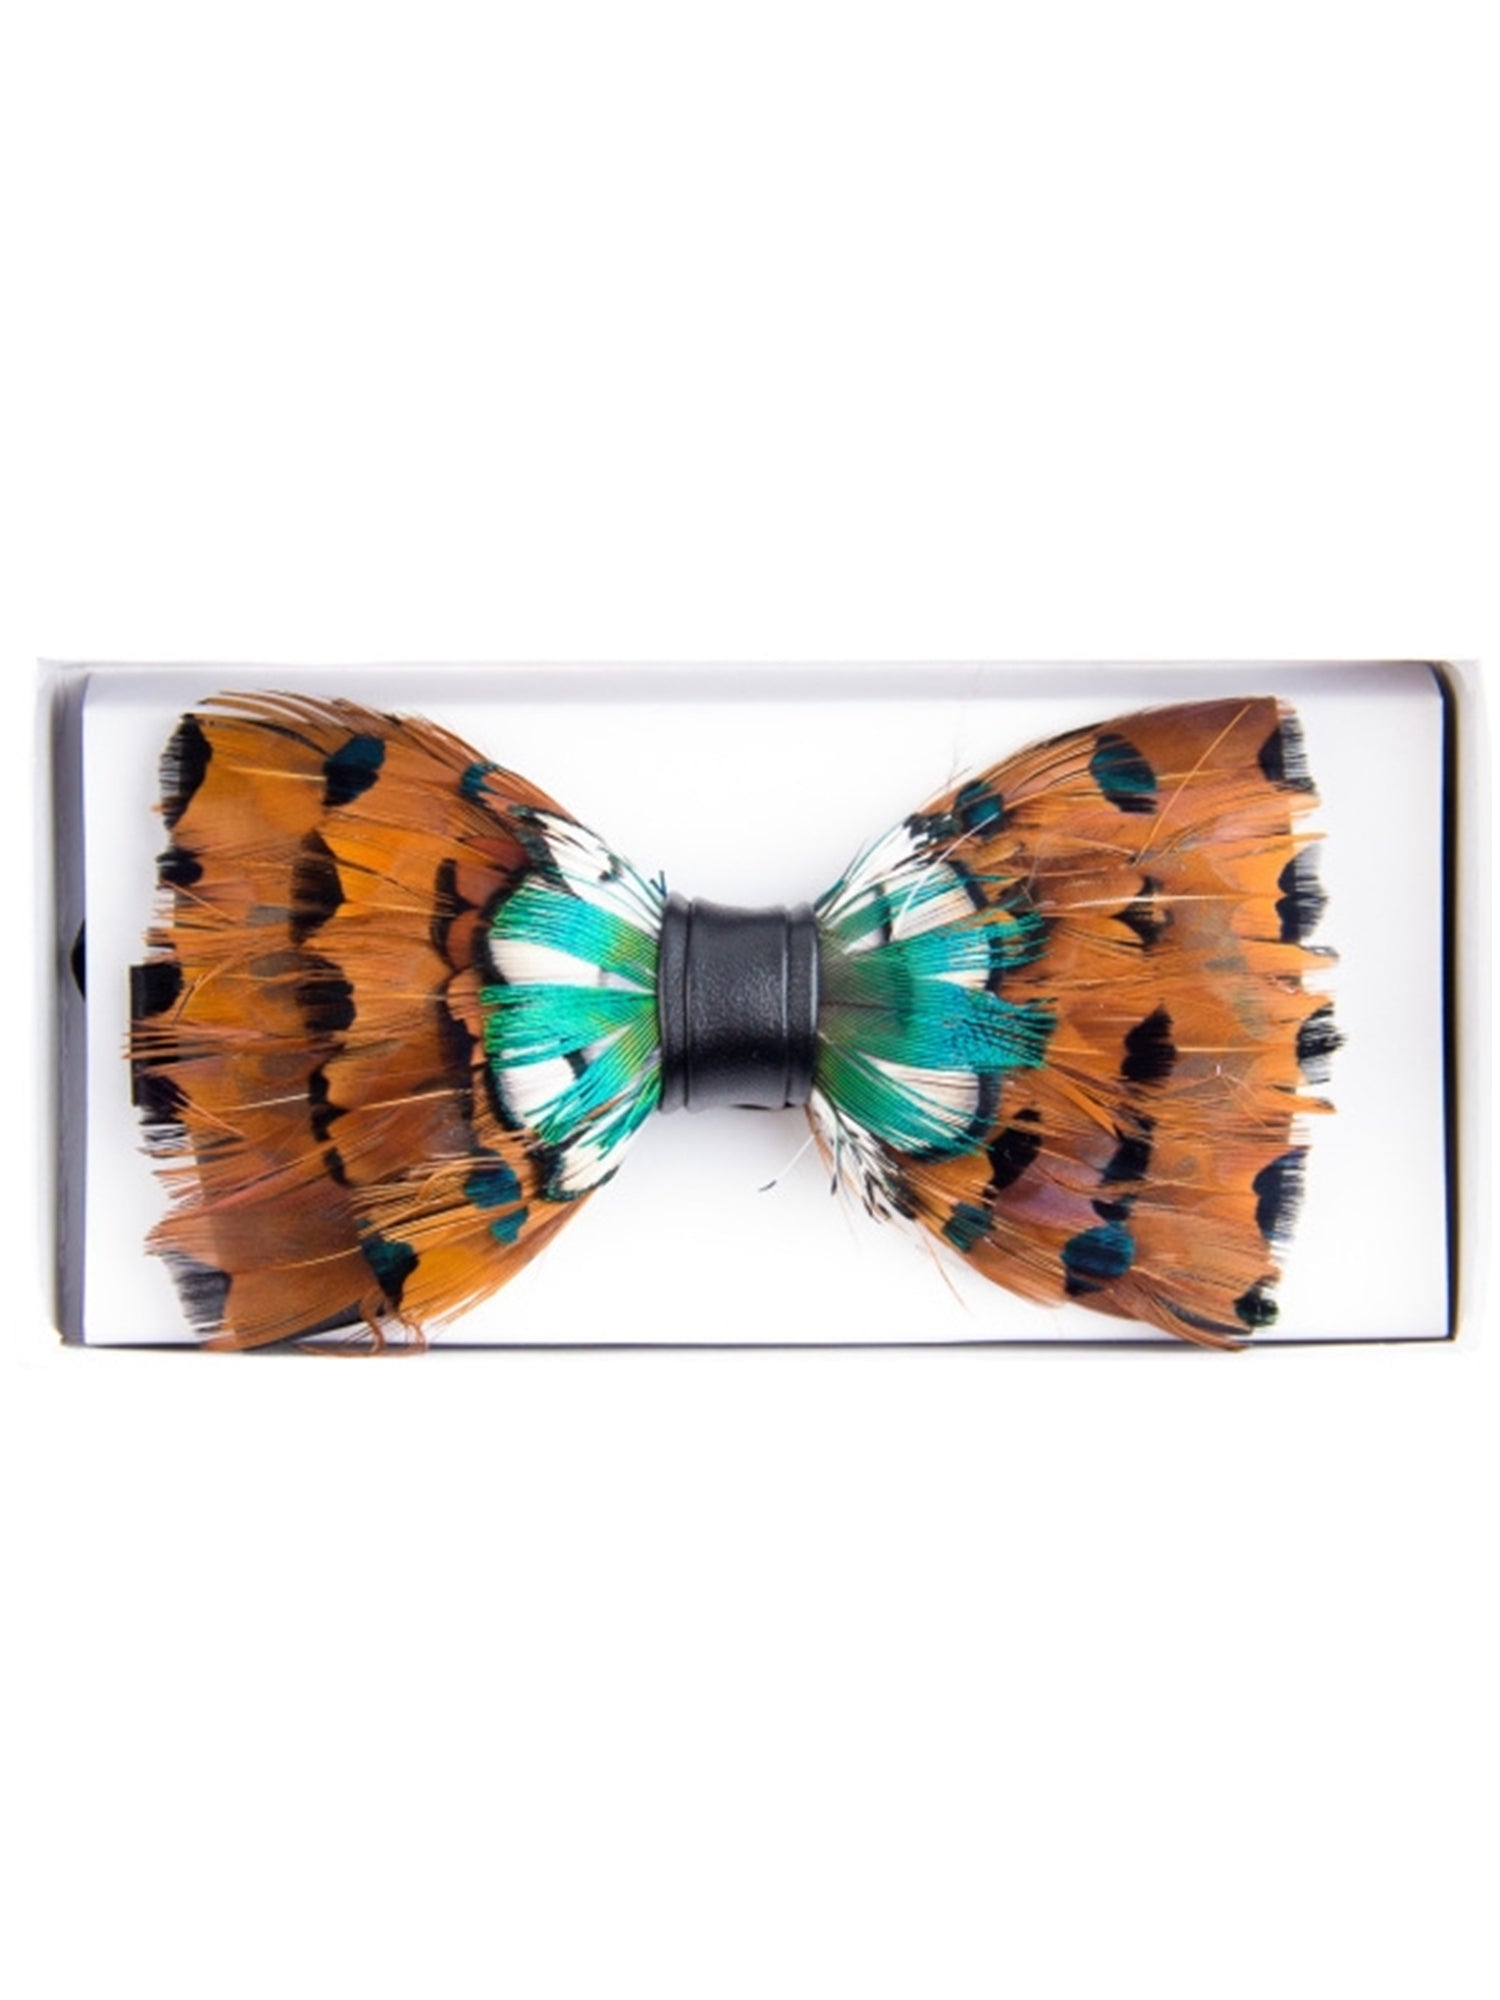 Men's Novelty Feather Banded Bow Tie Bow Tie TheDapperTie Blue And Orange One Size 